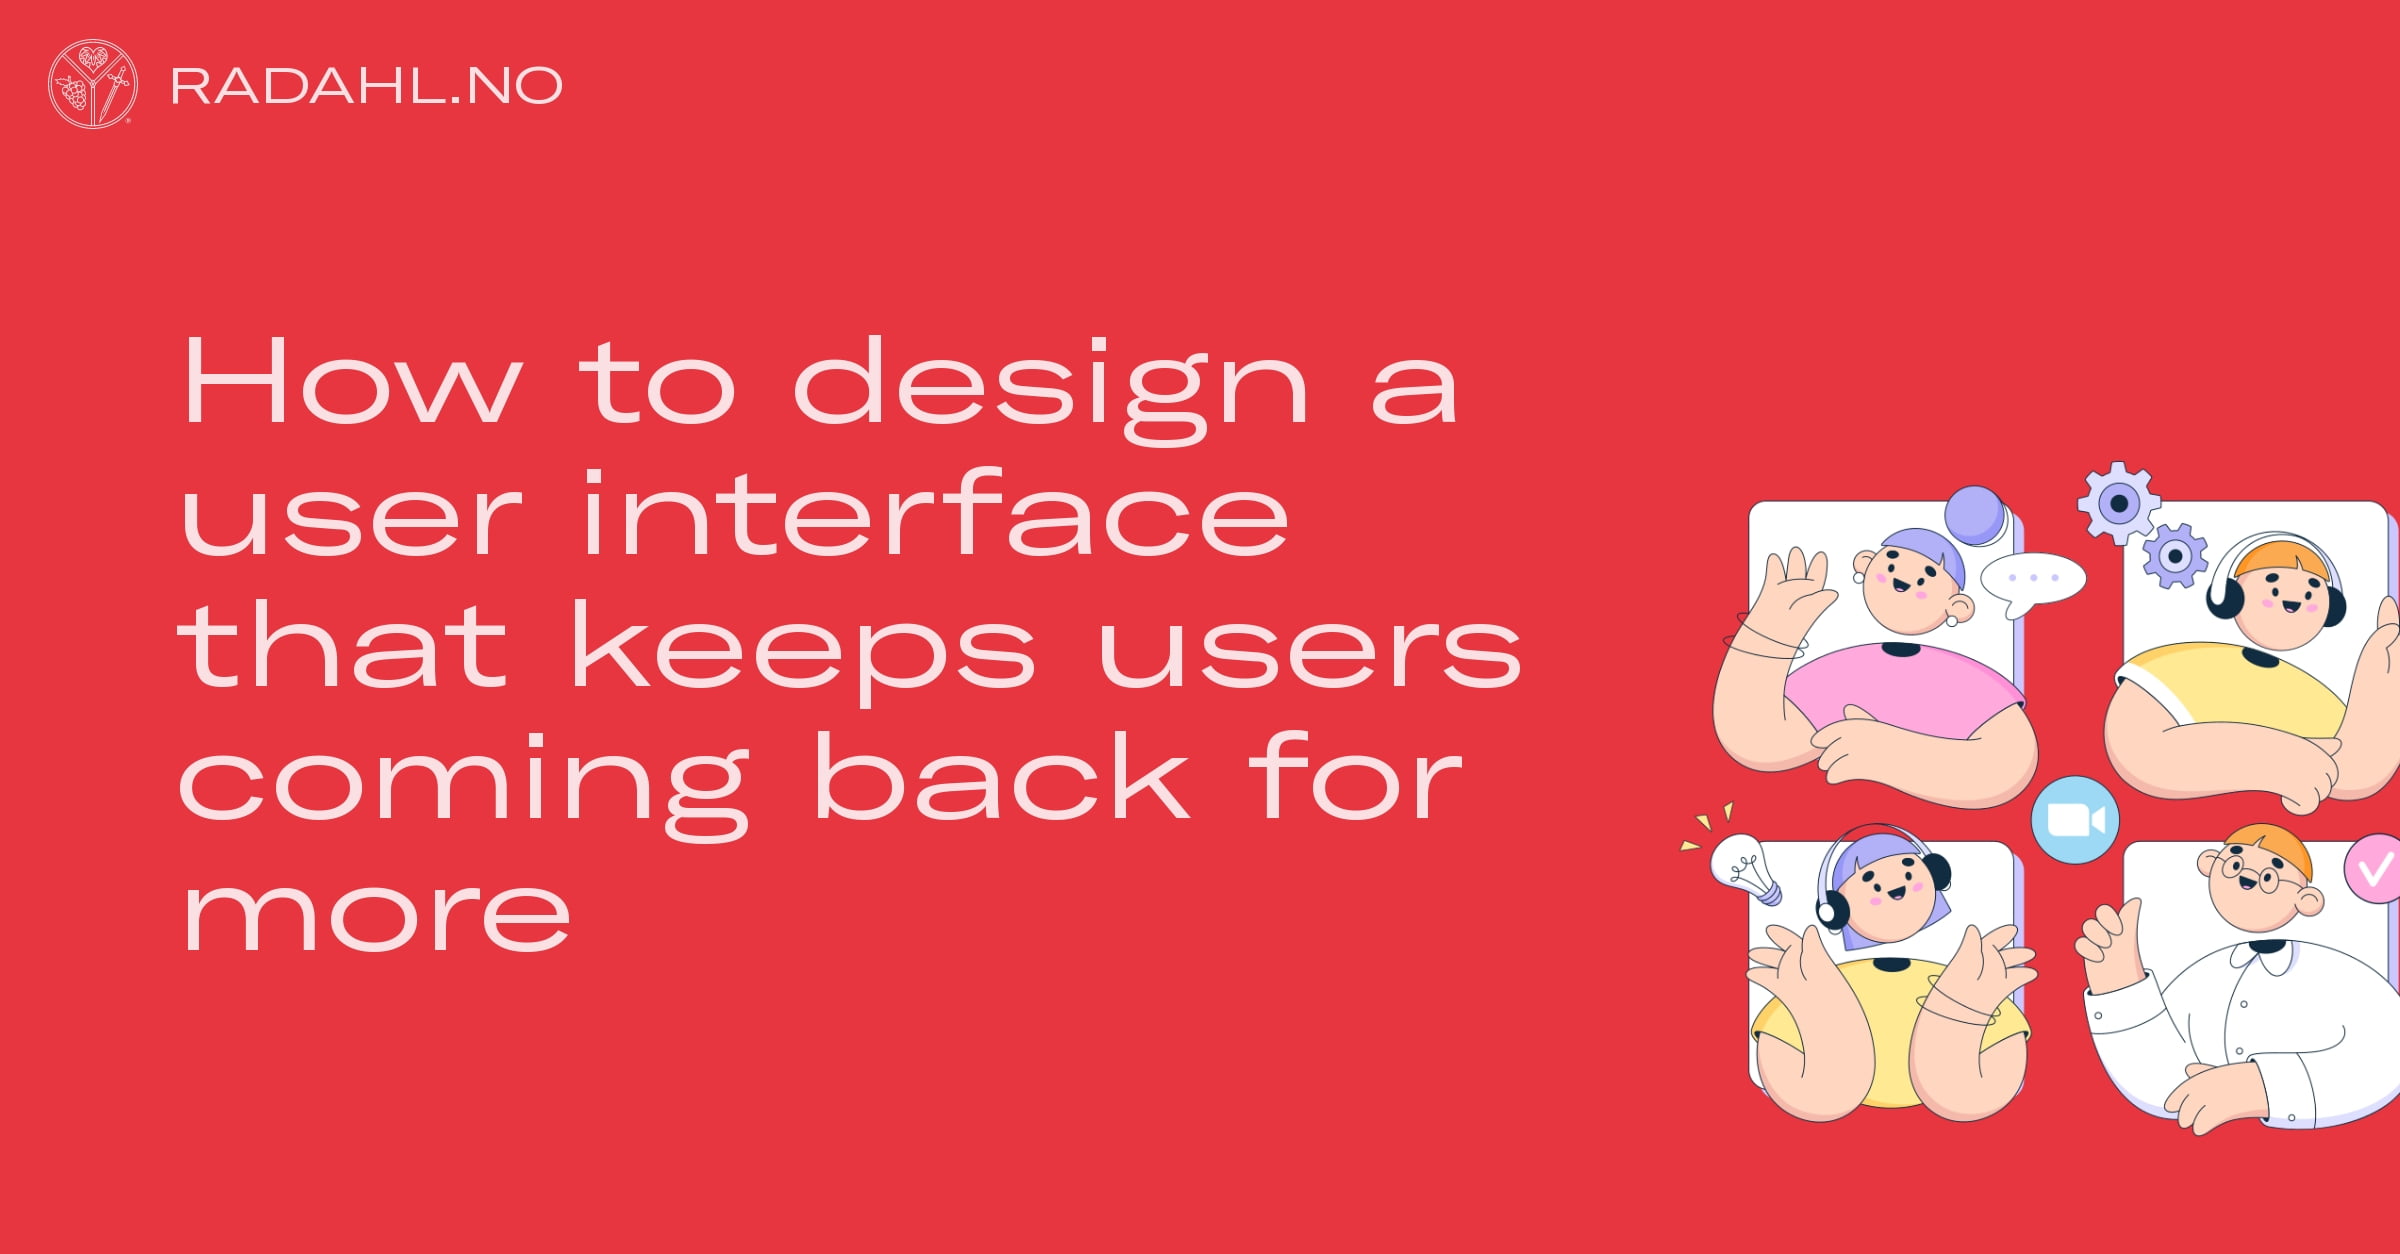 How to design a user interface that keeps users coming back for more